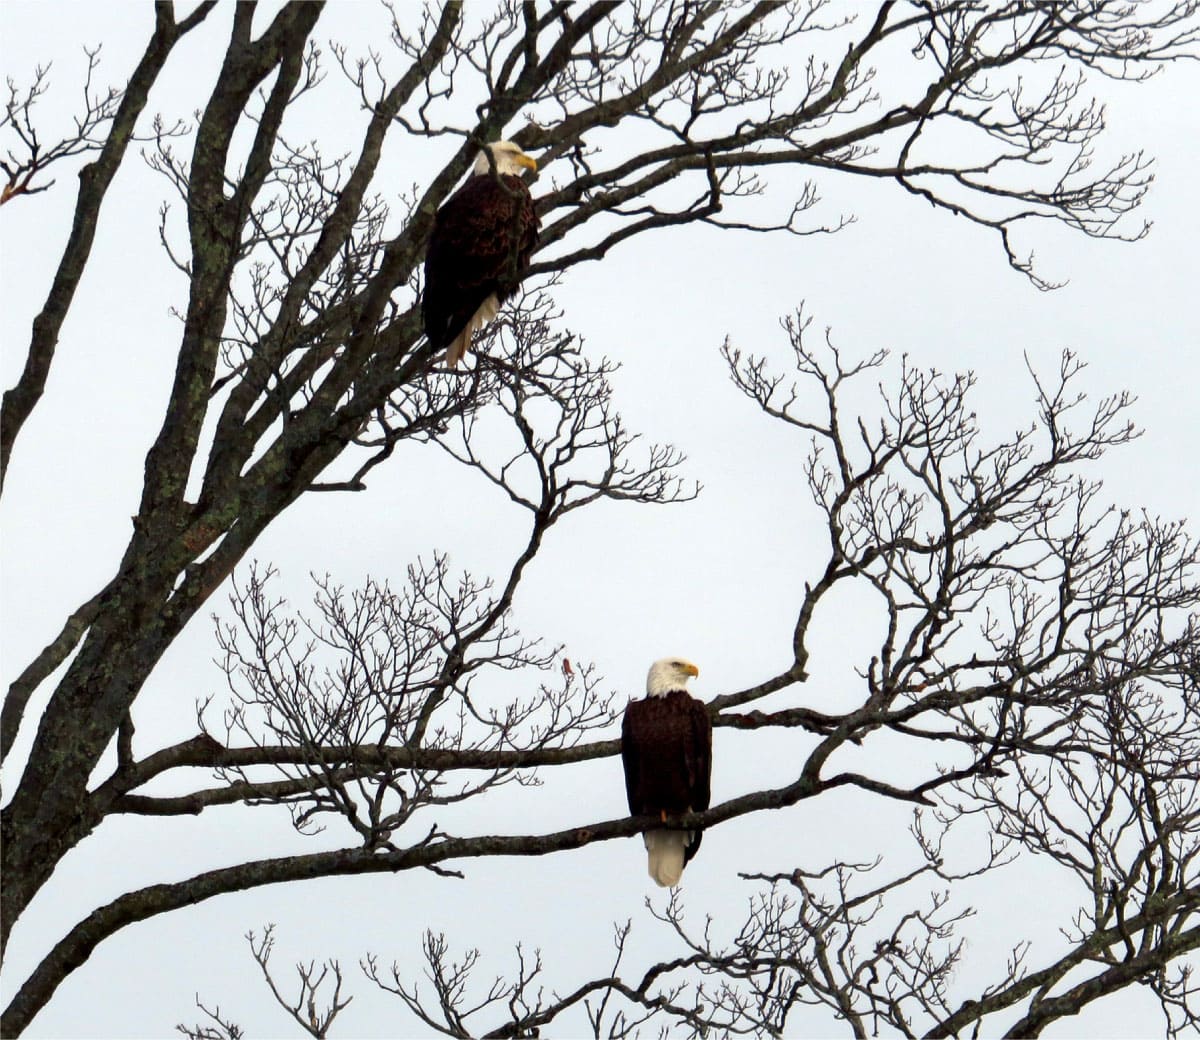 Two bald eagles in a tree